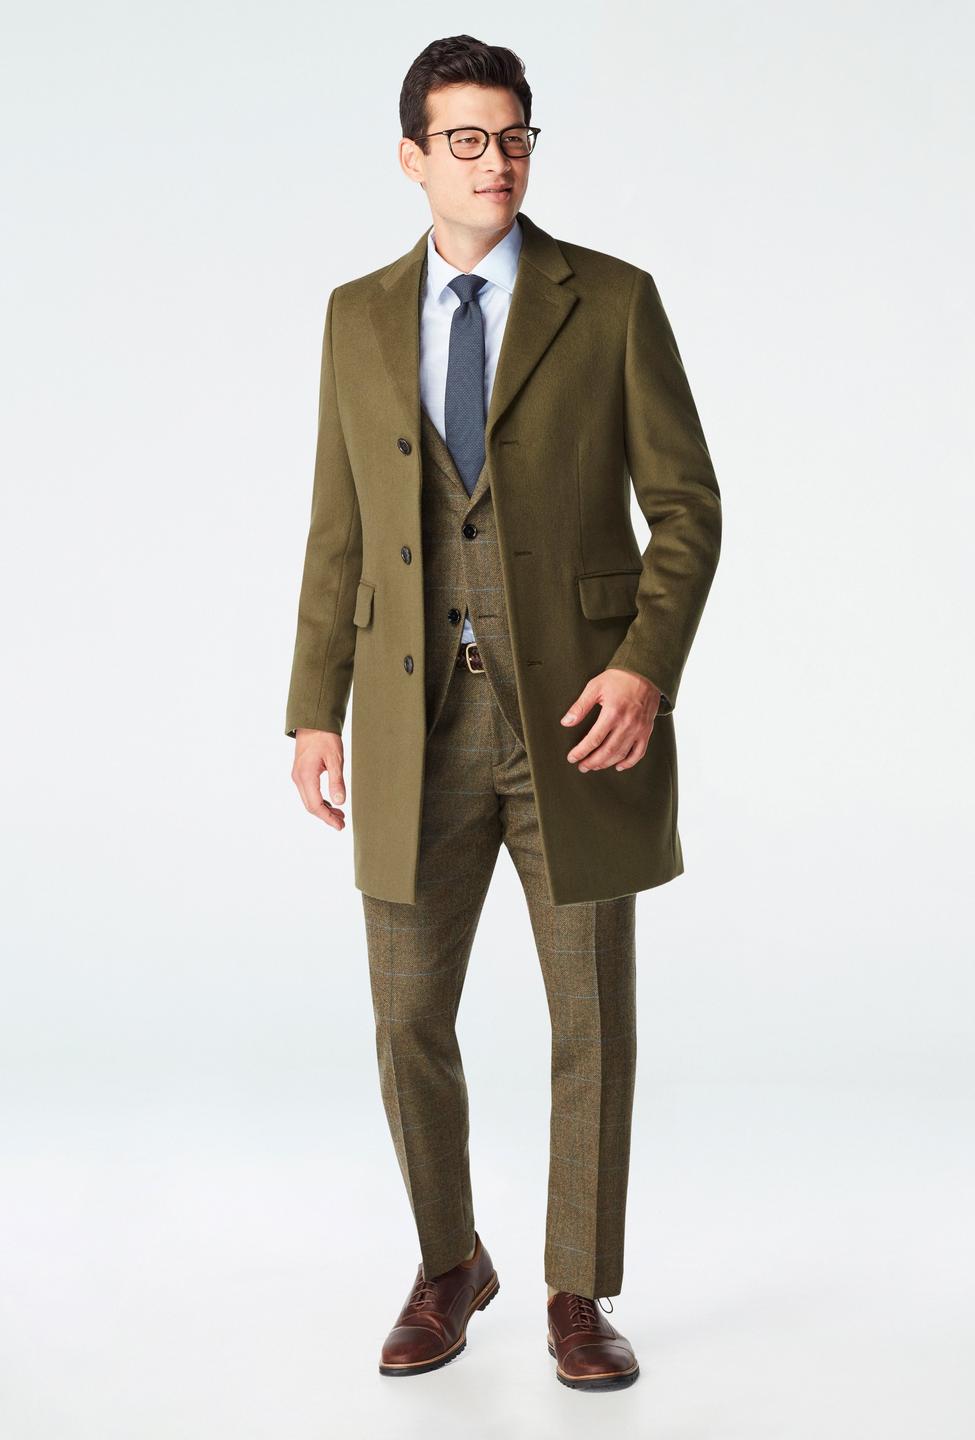 Green outerwear - Heartford Solid Design from Indochino Collection